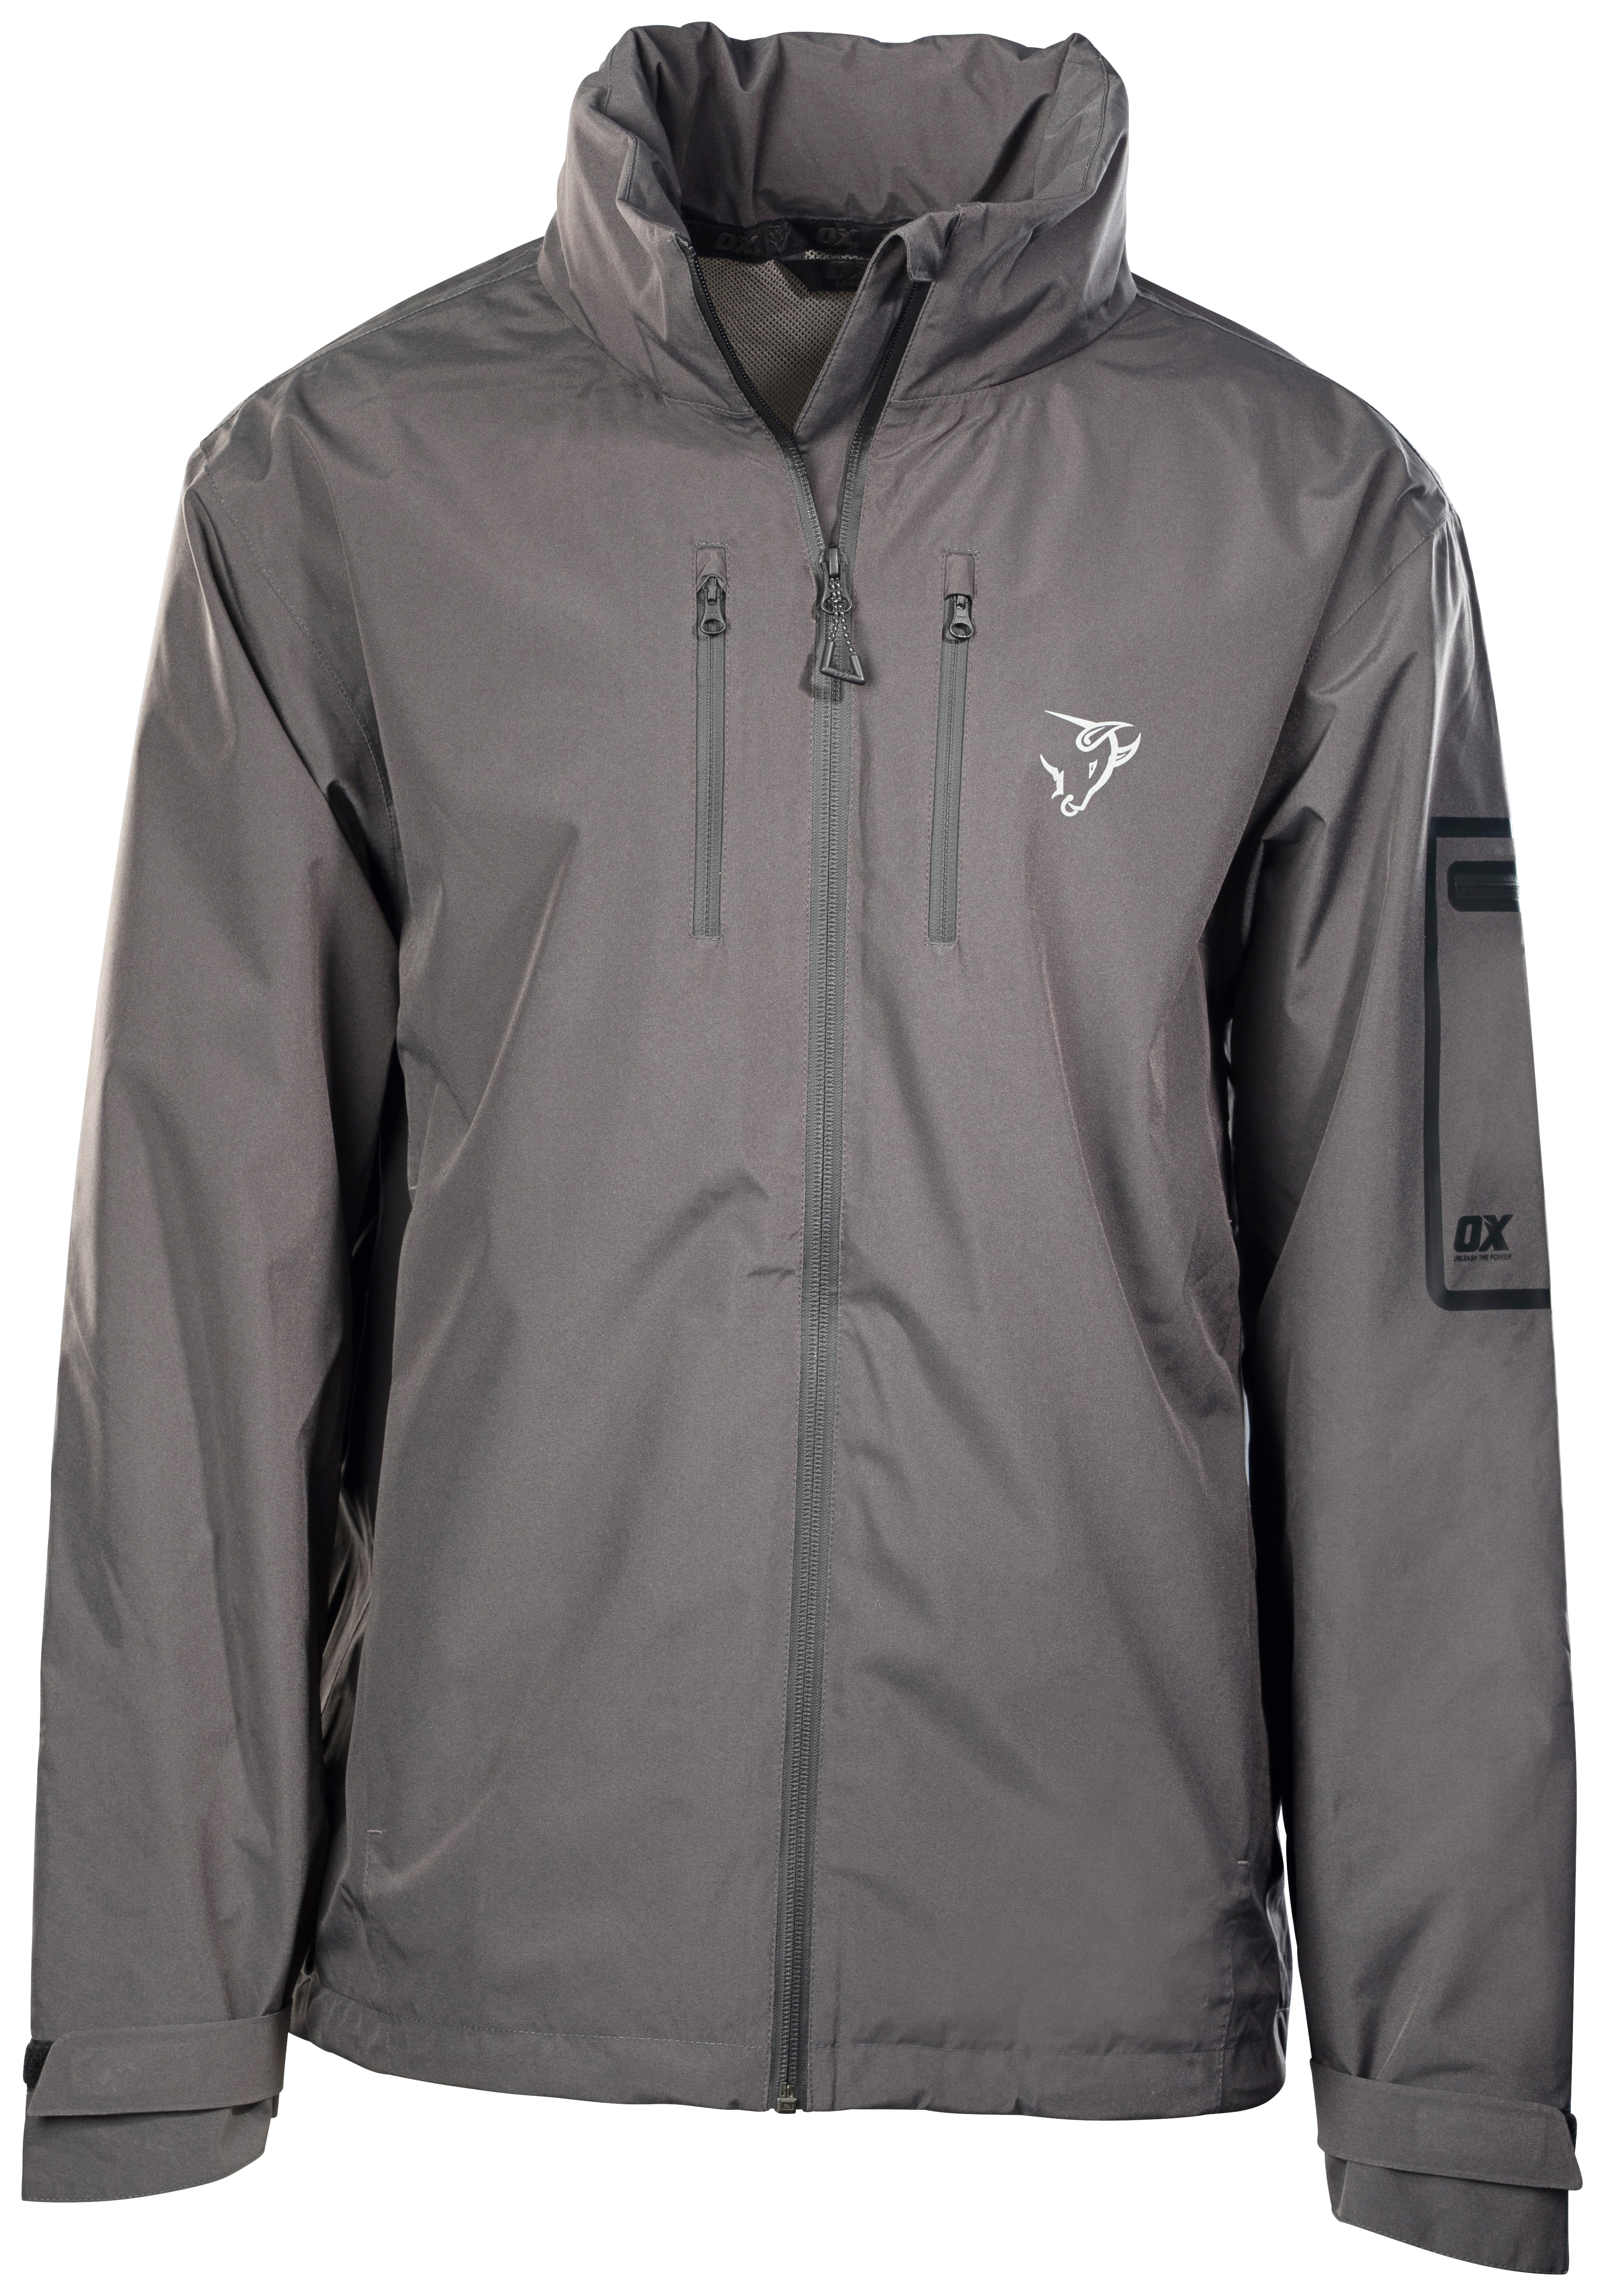 Image of OX Packable Jacket, in Grey Lightweight, Size: XL